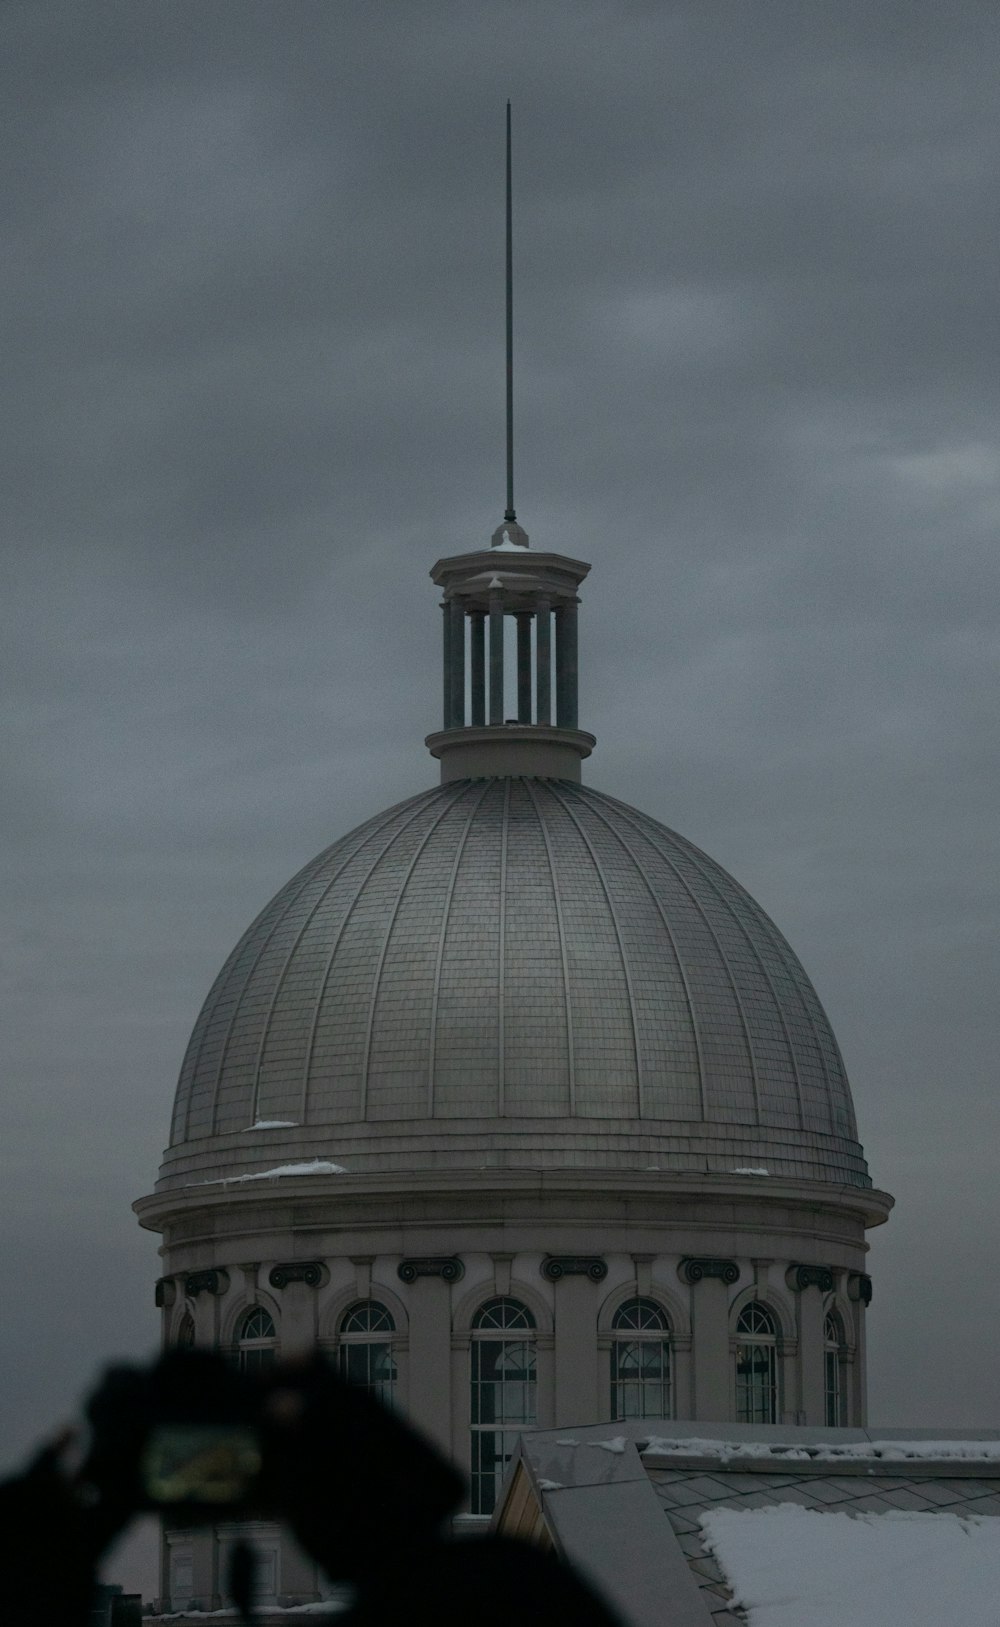 a dome with a weather vane on top of it